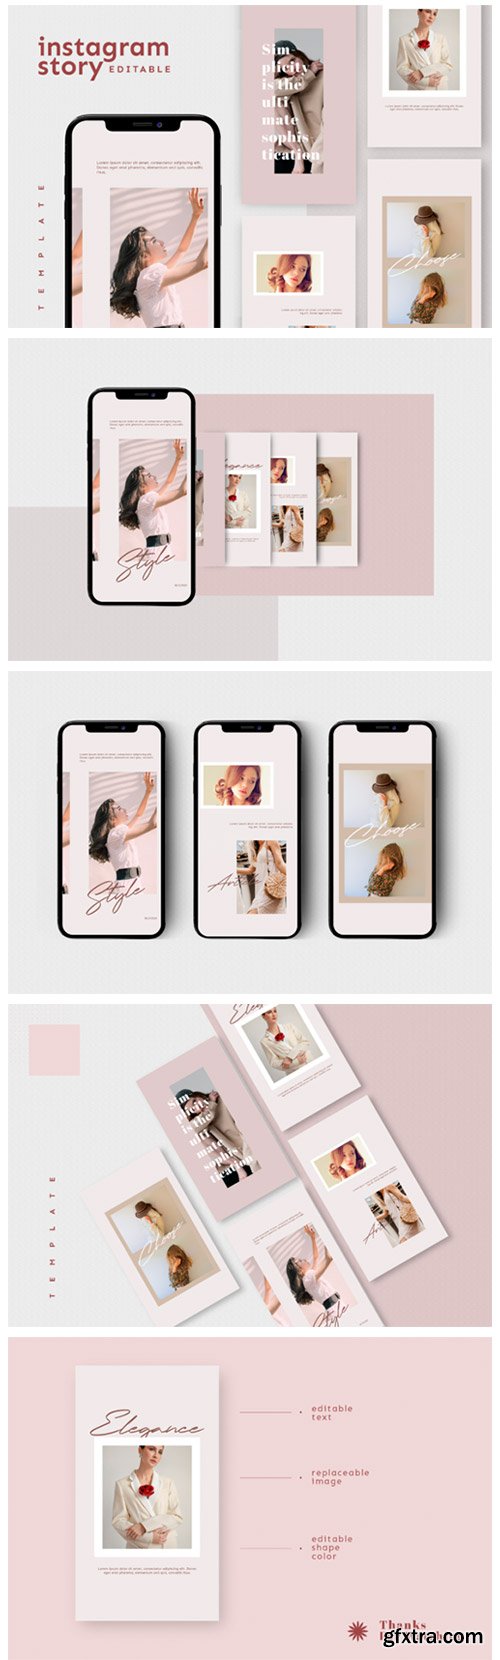 Instagram Story Template 3768416